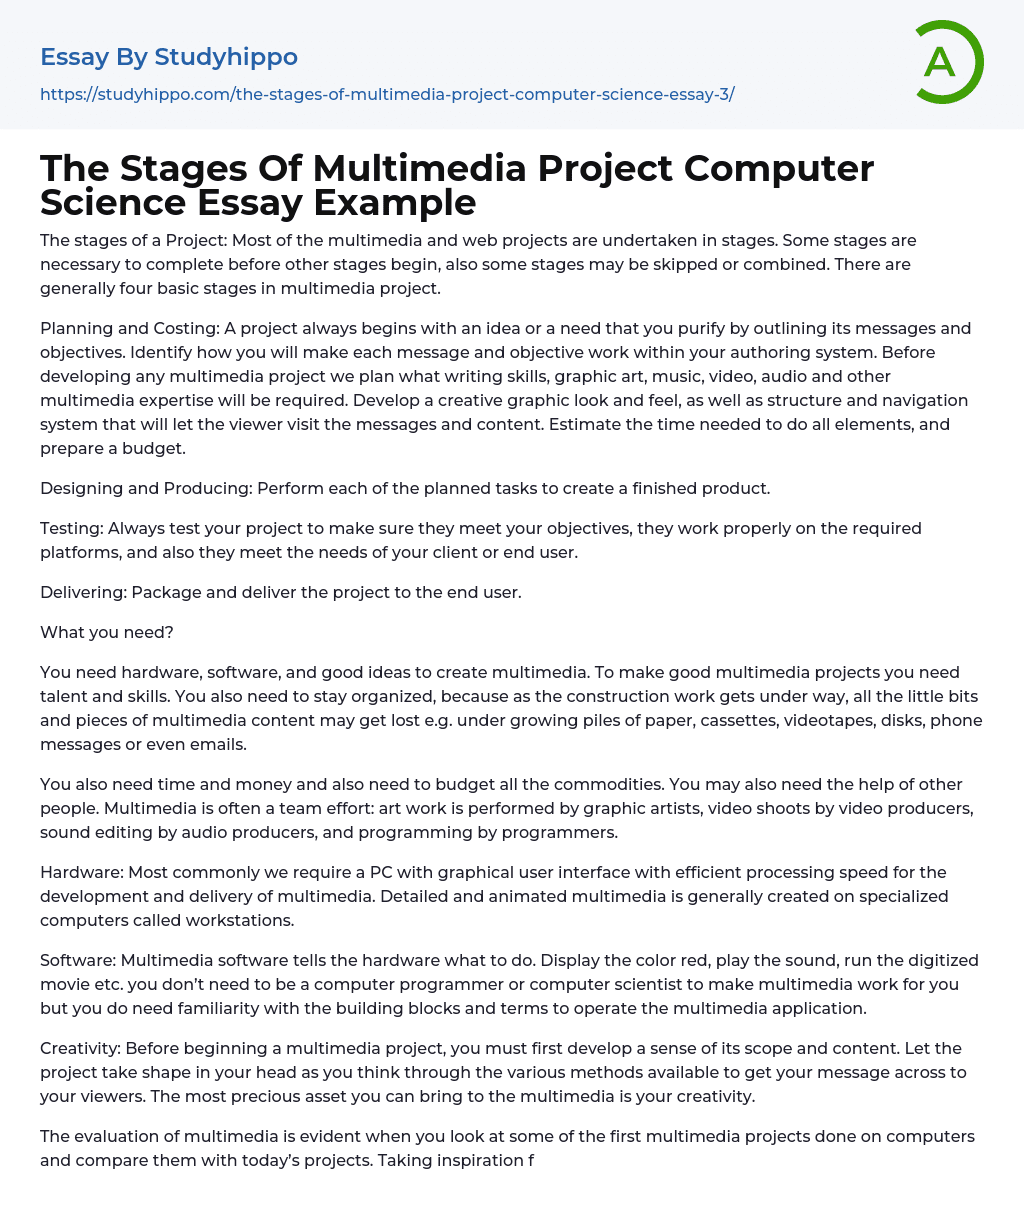 The Stages Of Multimedia Project Computer Science Essay Example